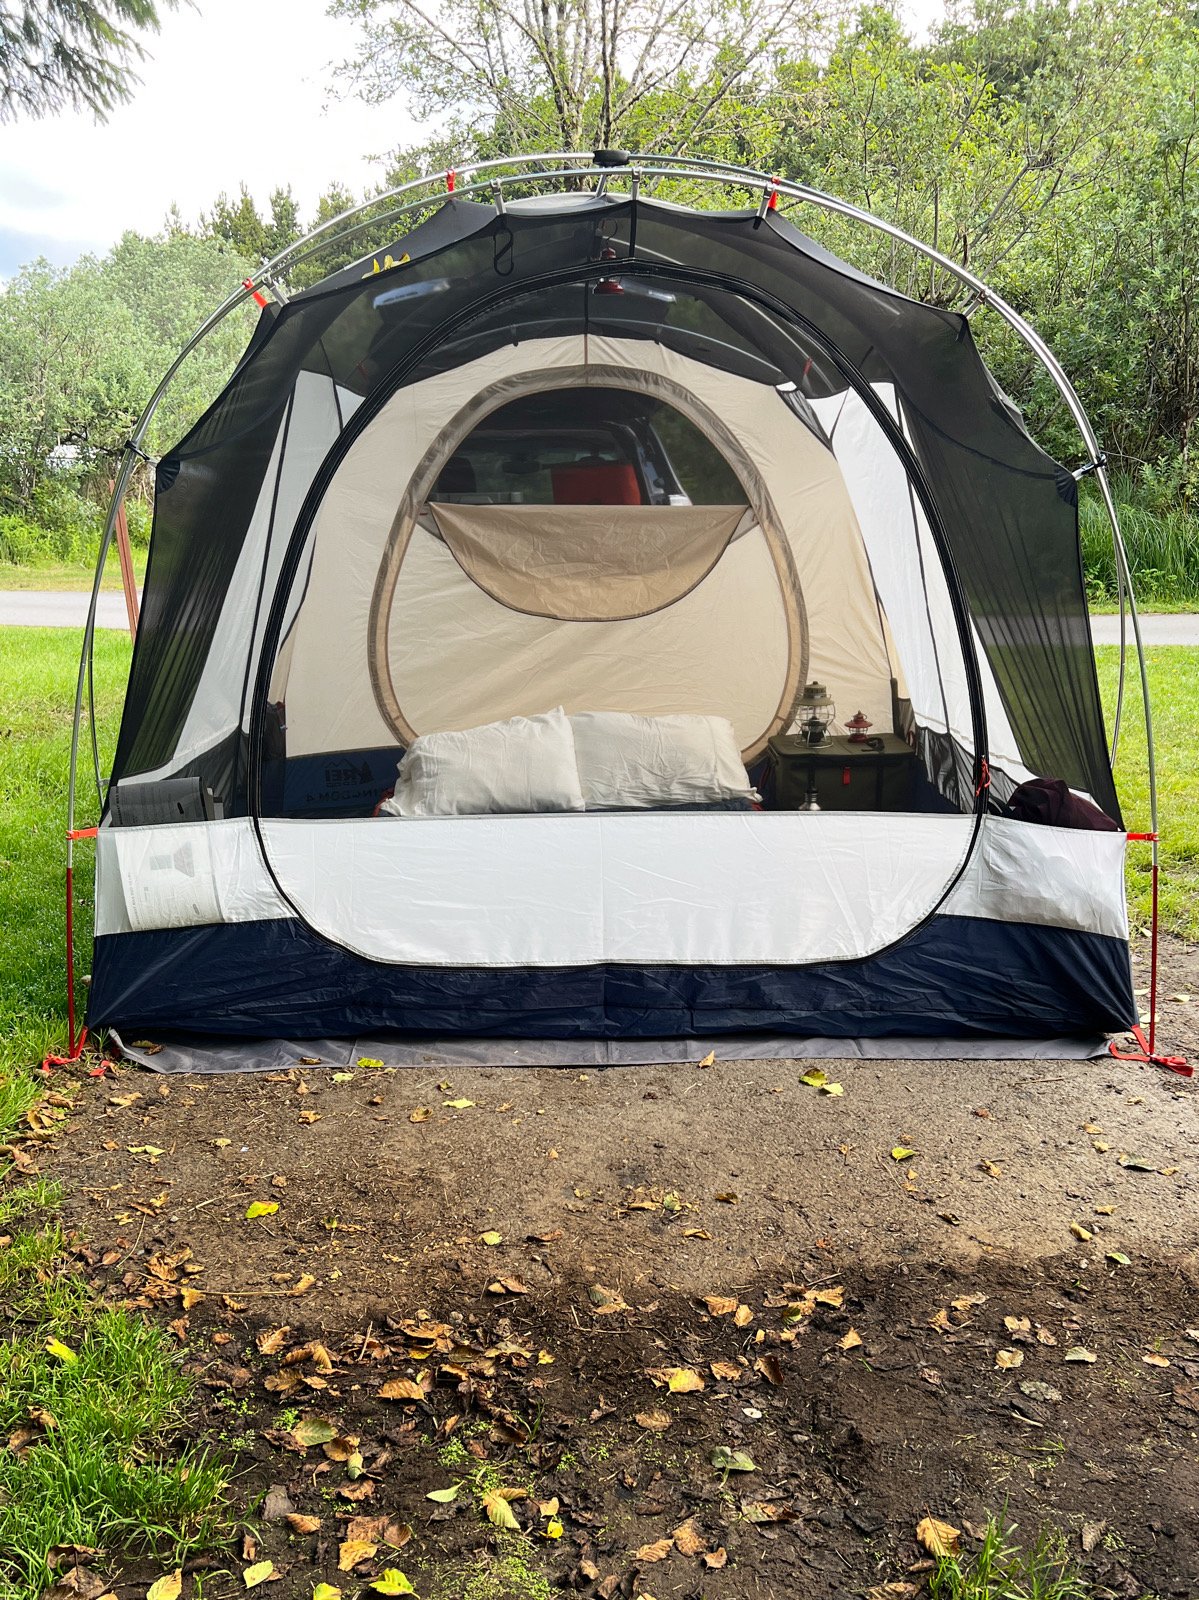 EXPED MegaMat Max15 Duo makes for a cozy camp and tent